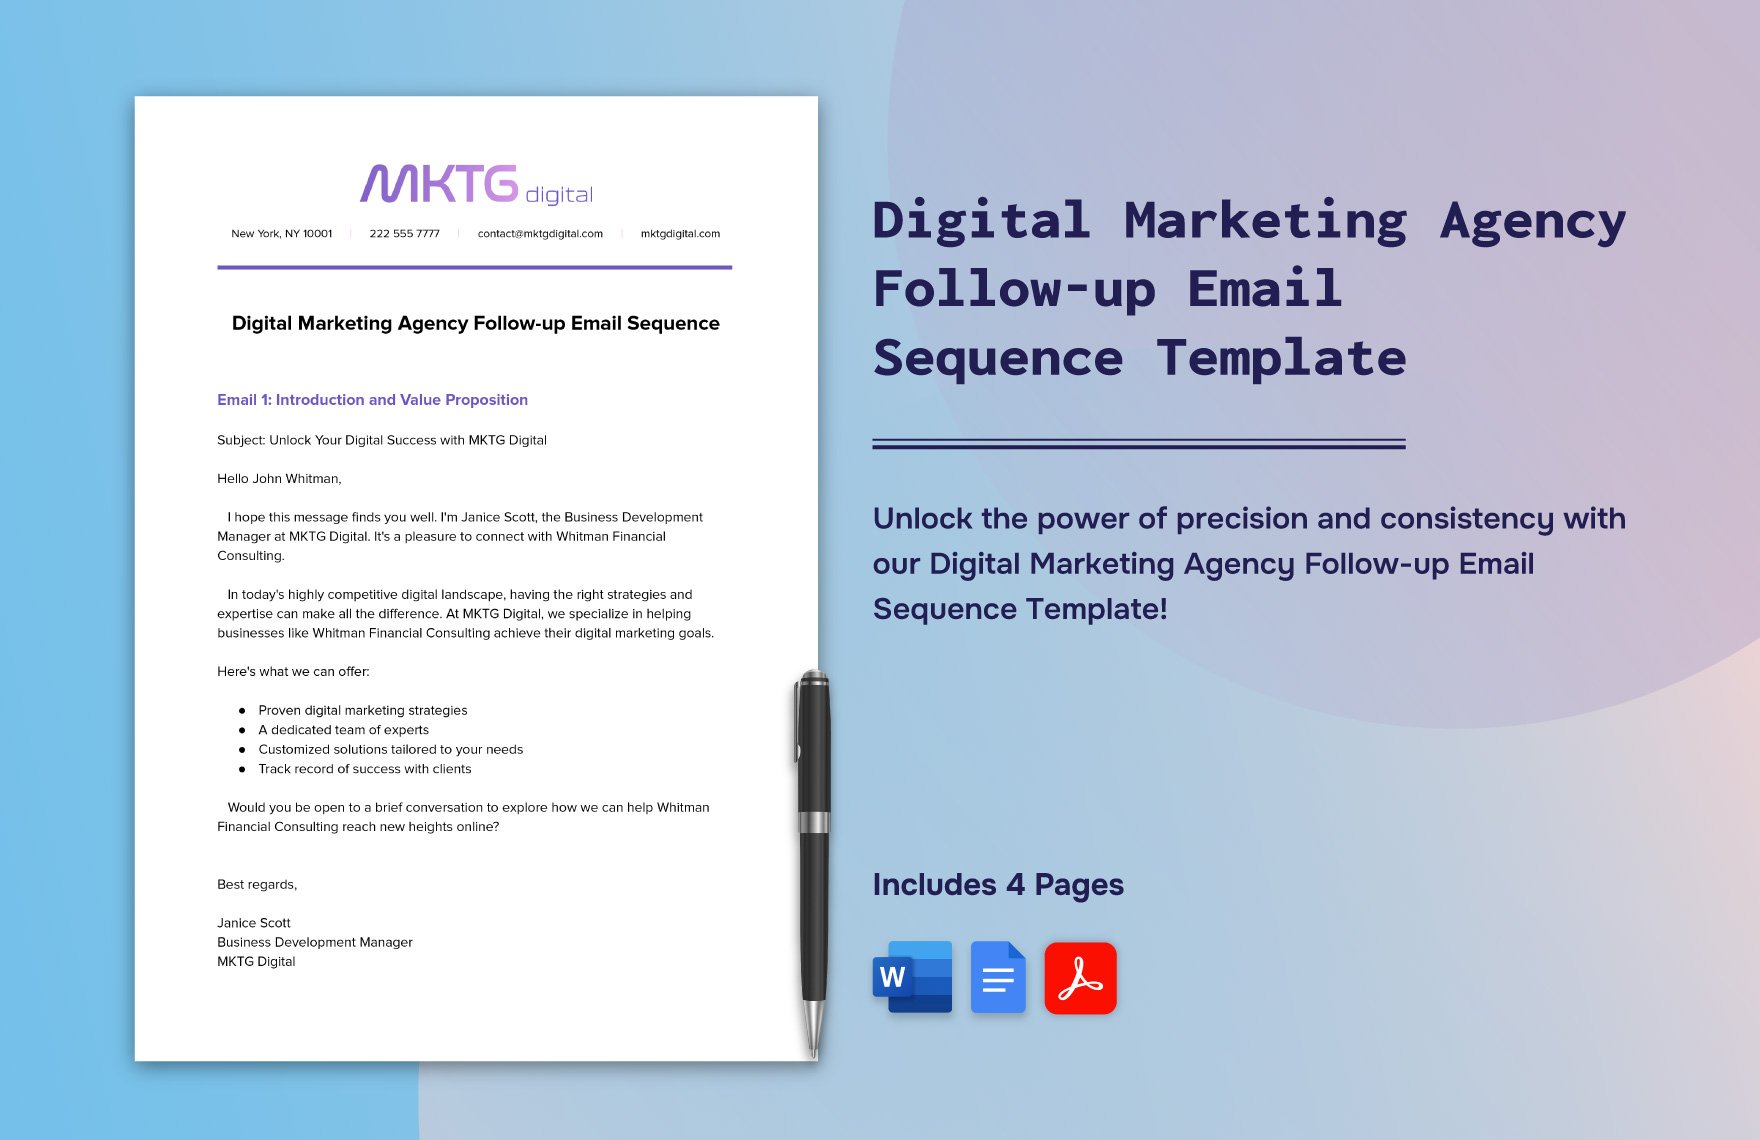 Digital Marketing Agency Follow-up Email Sequence Template